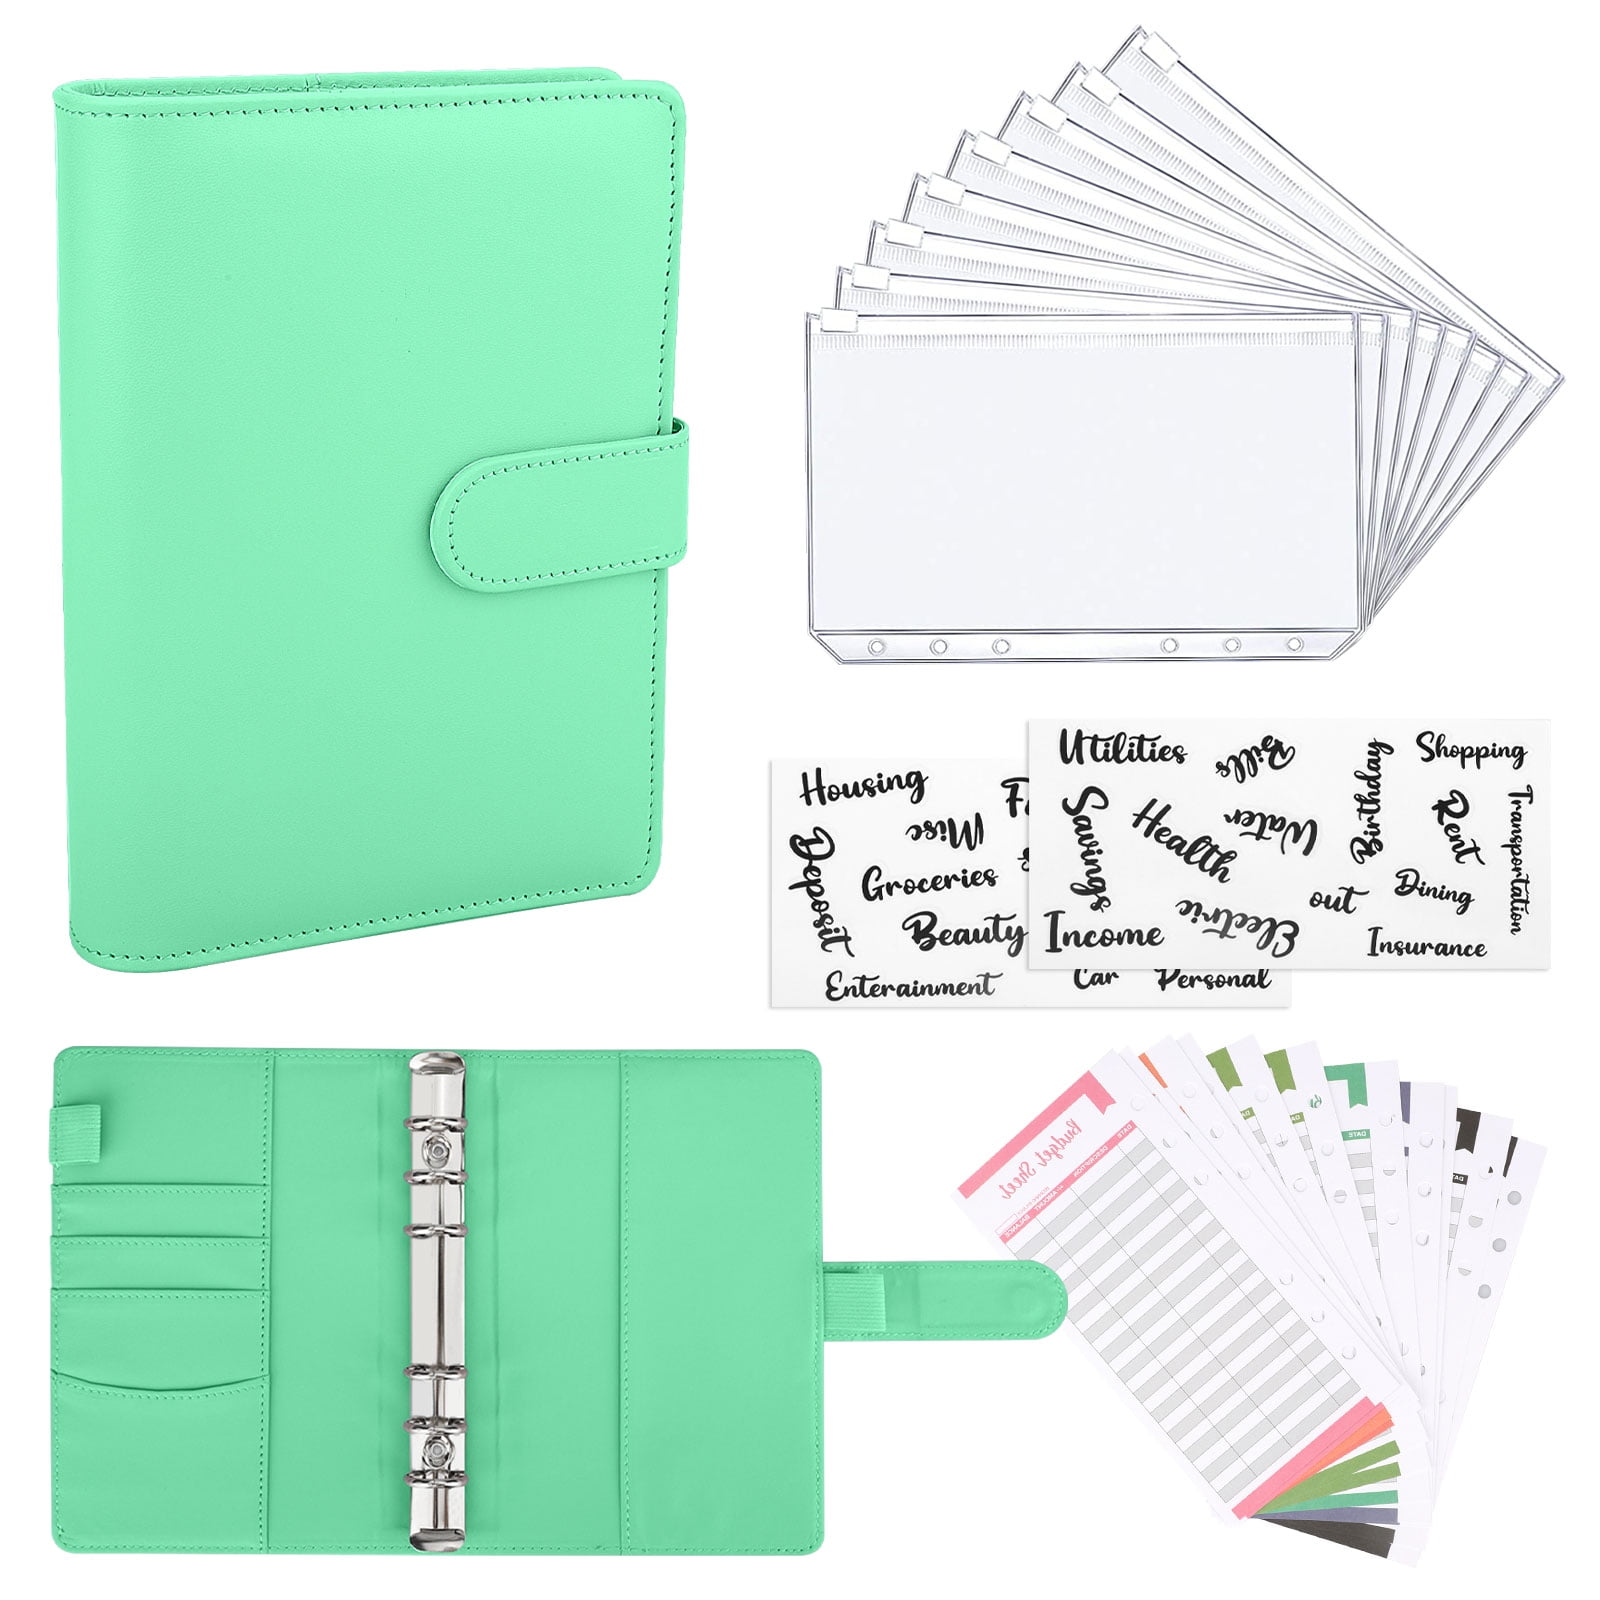 A6 Pu Leather Notebook Binder Tsv Budget Planner Organizer With